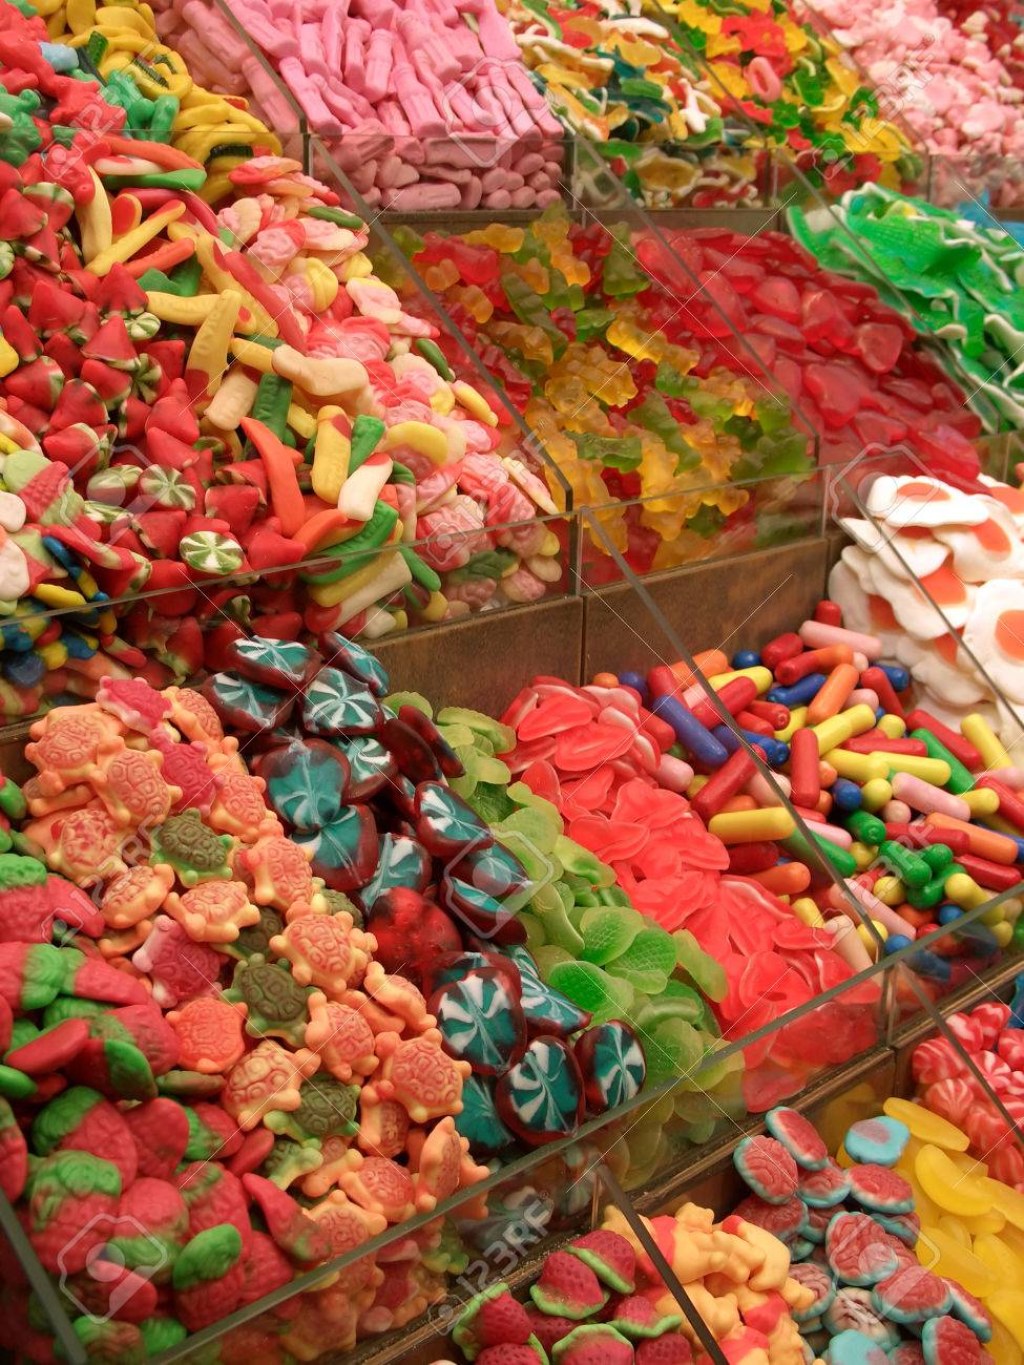 Picture of: Sweets On Display At The Market, Gummy Colorful Stuff Stock Photo